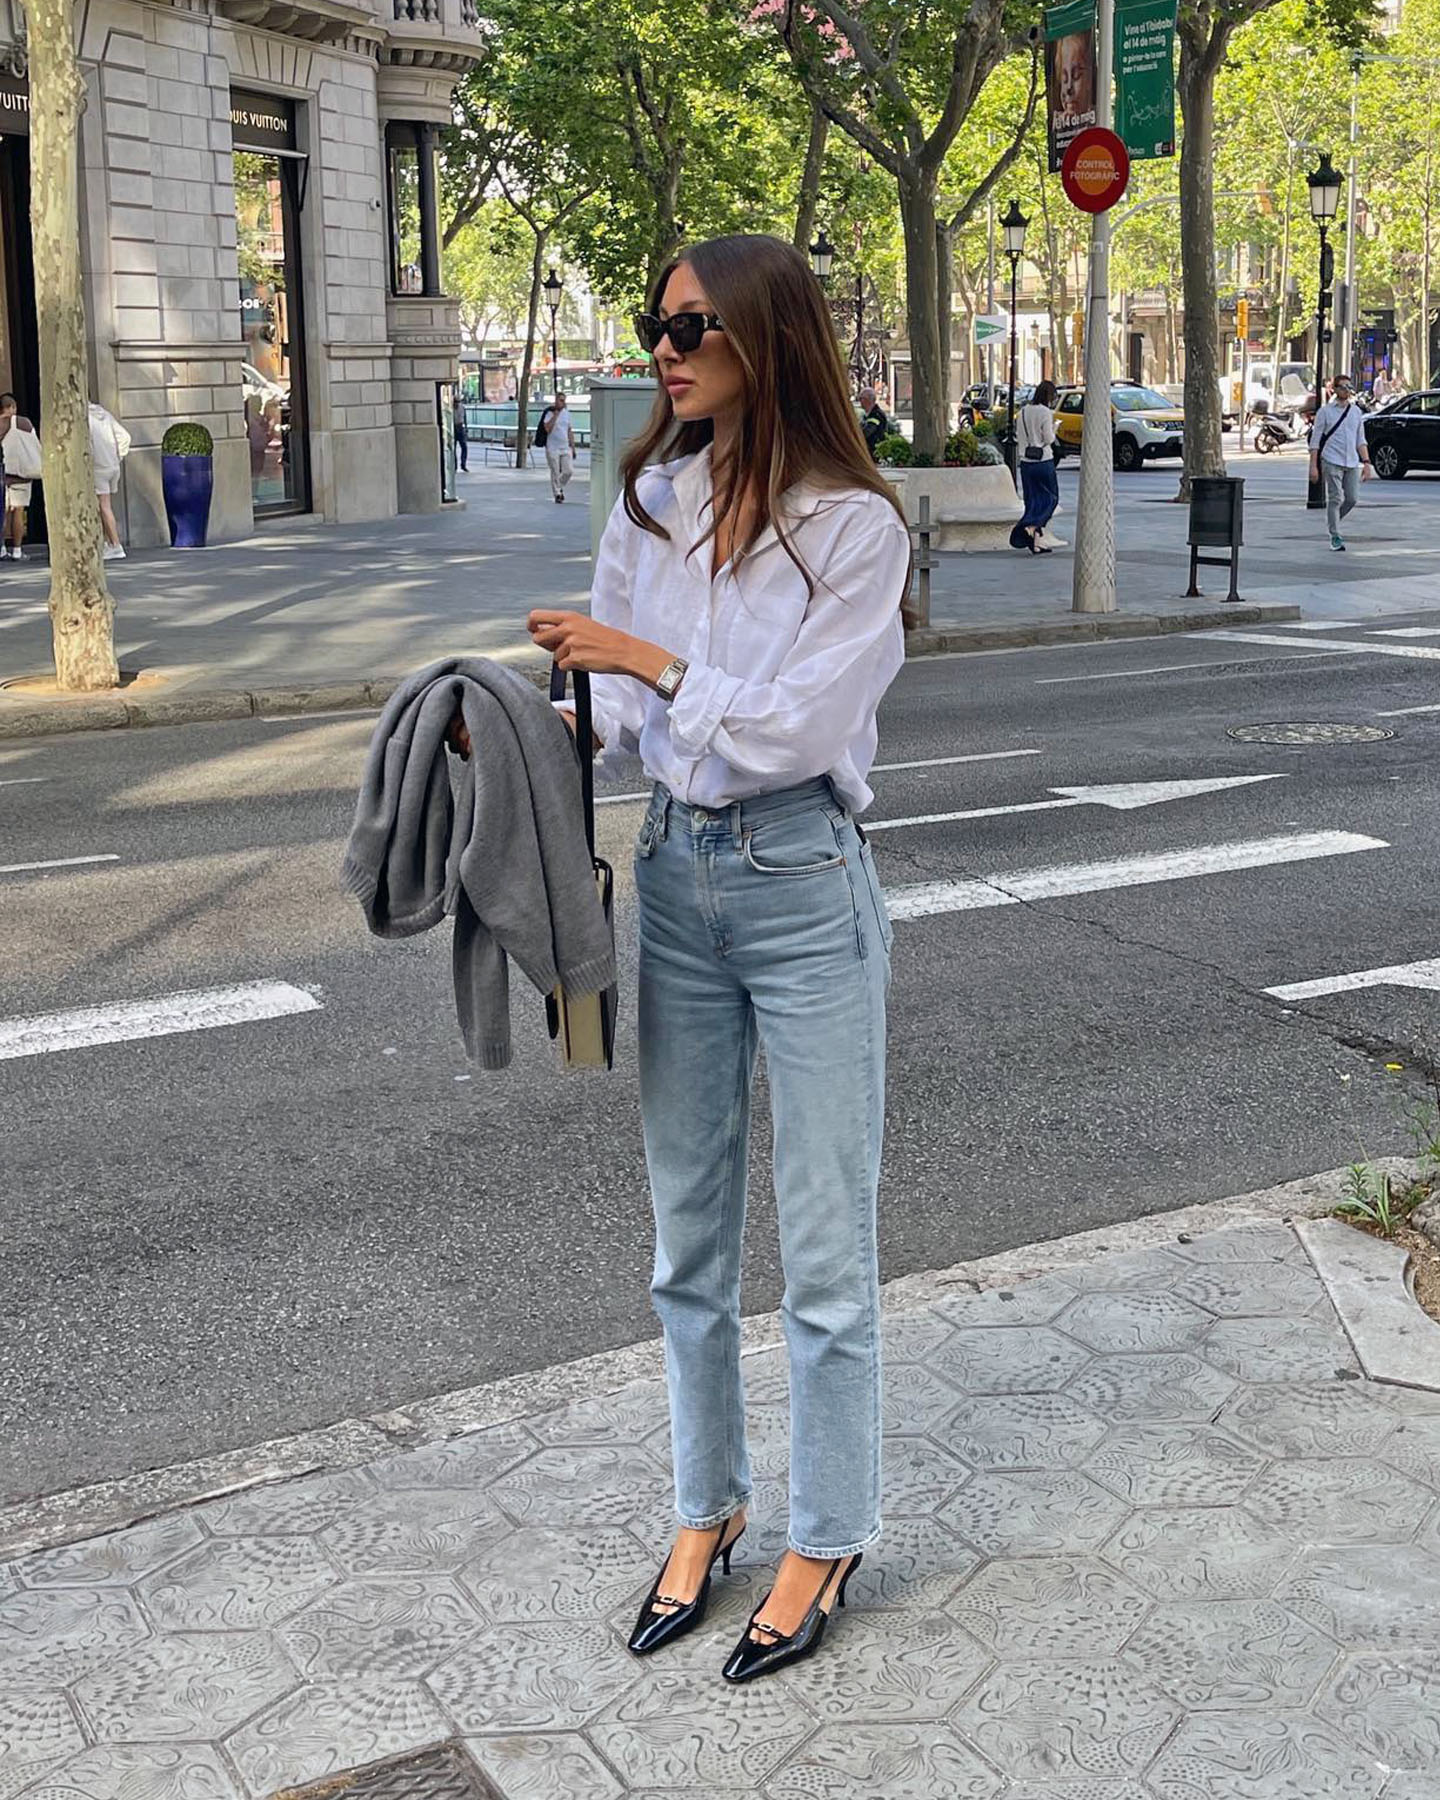 fashion influencer Felicia Akerstrom poses on the streets of Paris wearing a classic outfit with a white button-down shirt, straight-leg jeans, and black slingback heels